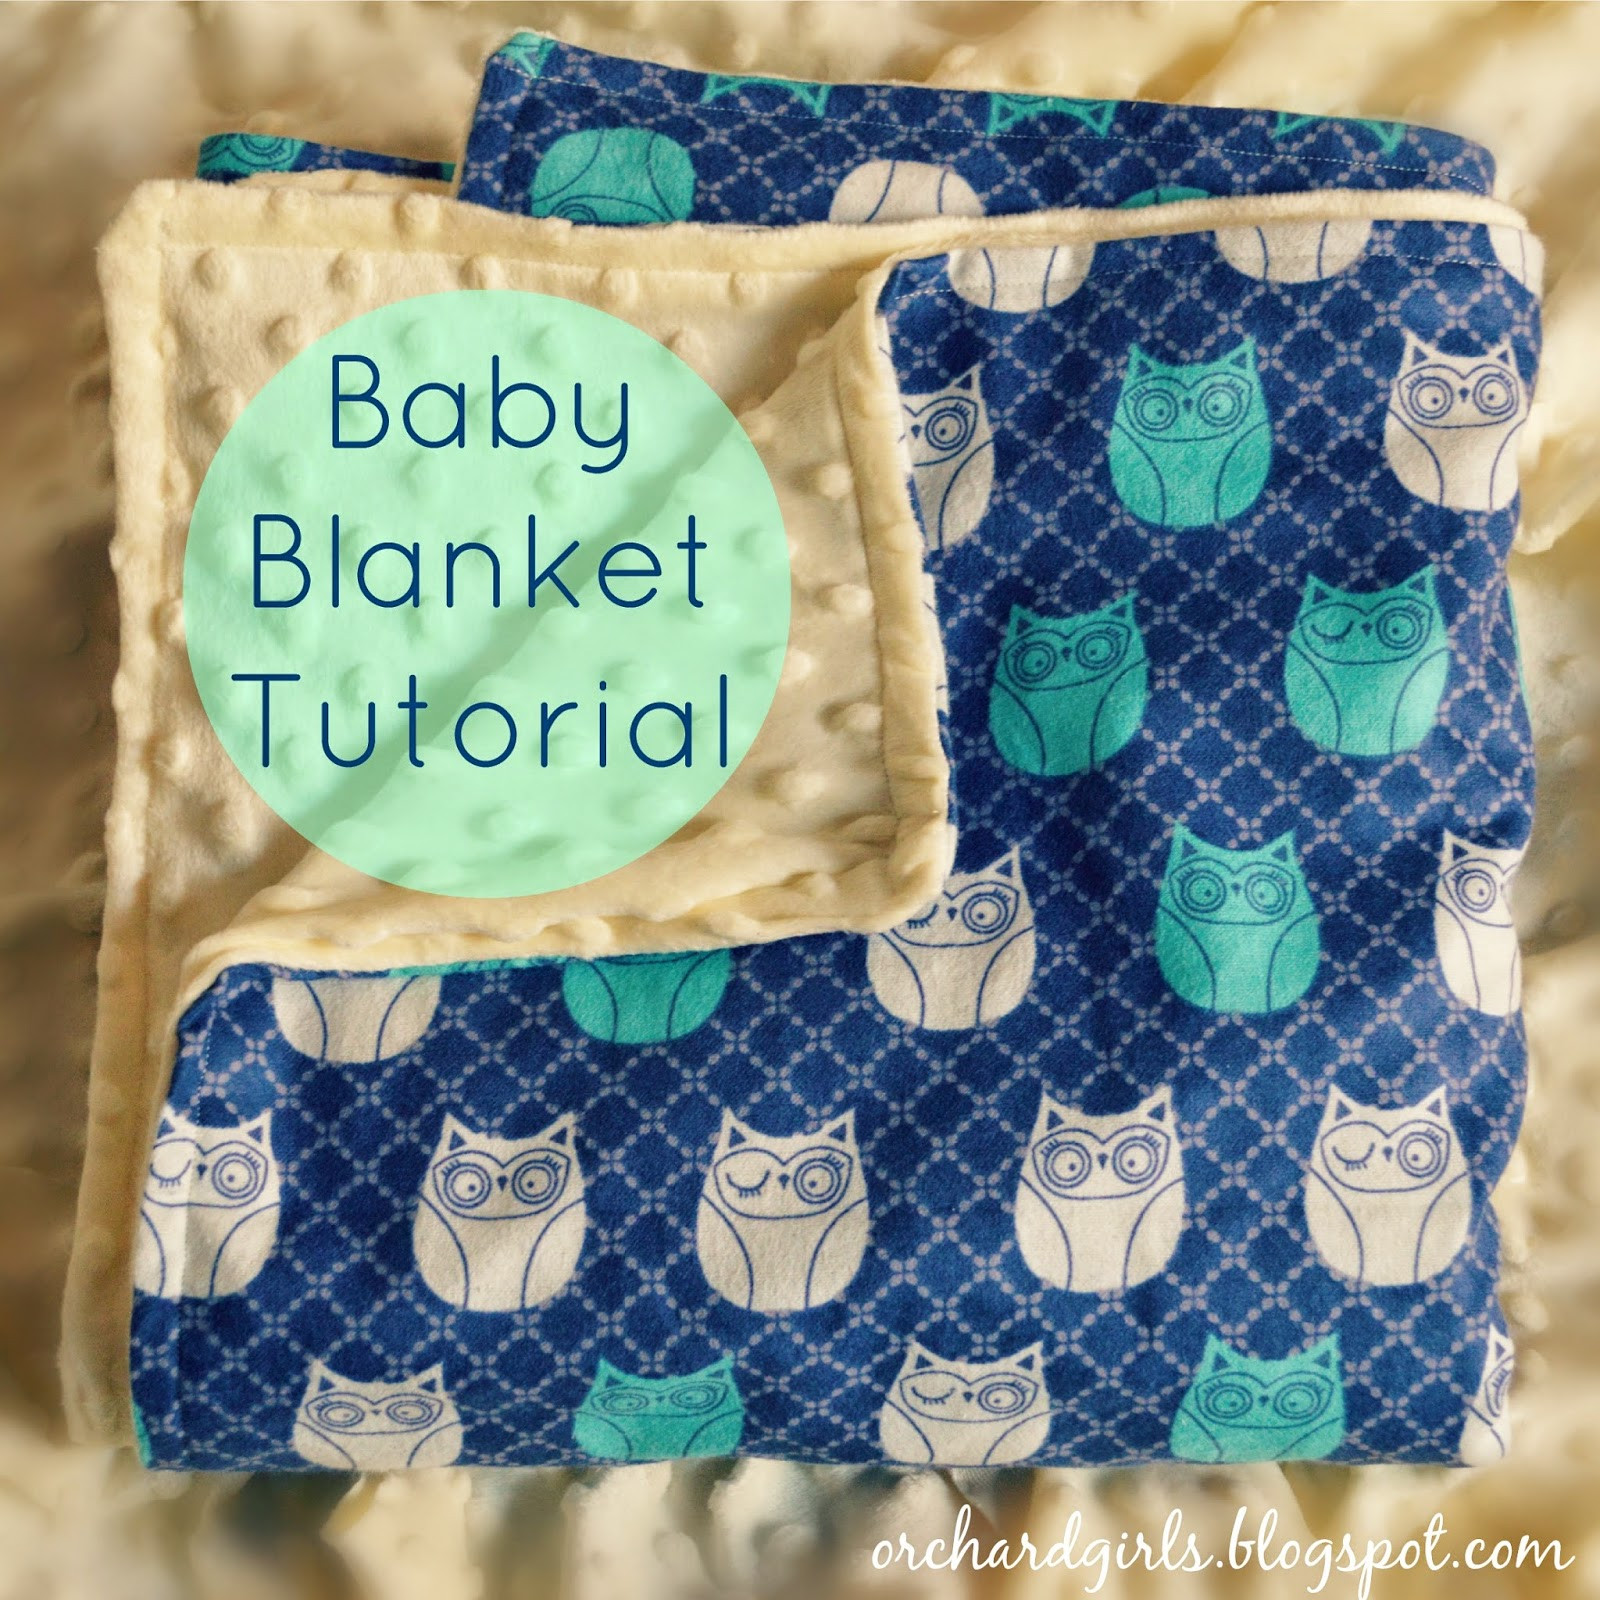 Best ideas about Baby Blankets DIY
. Save or Pin Orchard Girls Super easy DIY Baby Blanket Tutorial with Now.